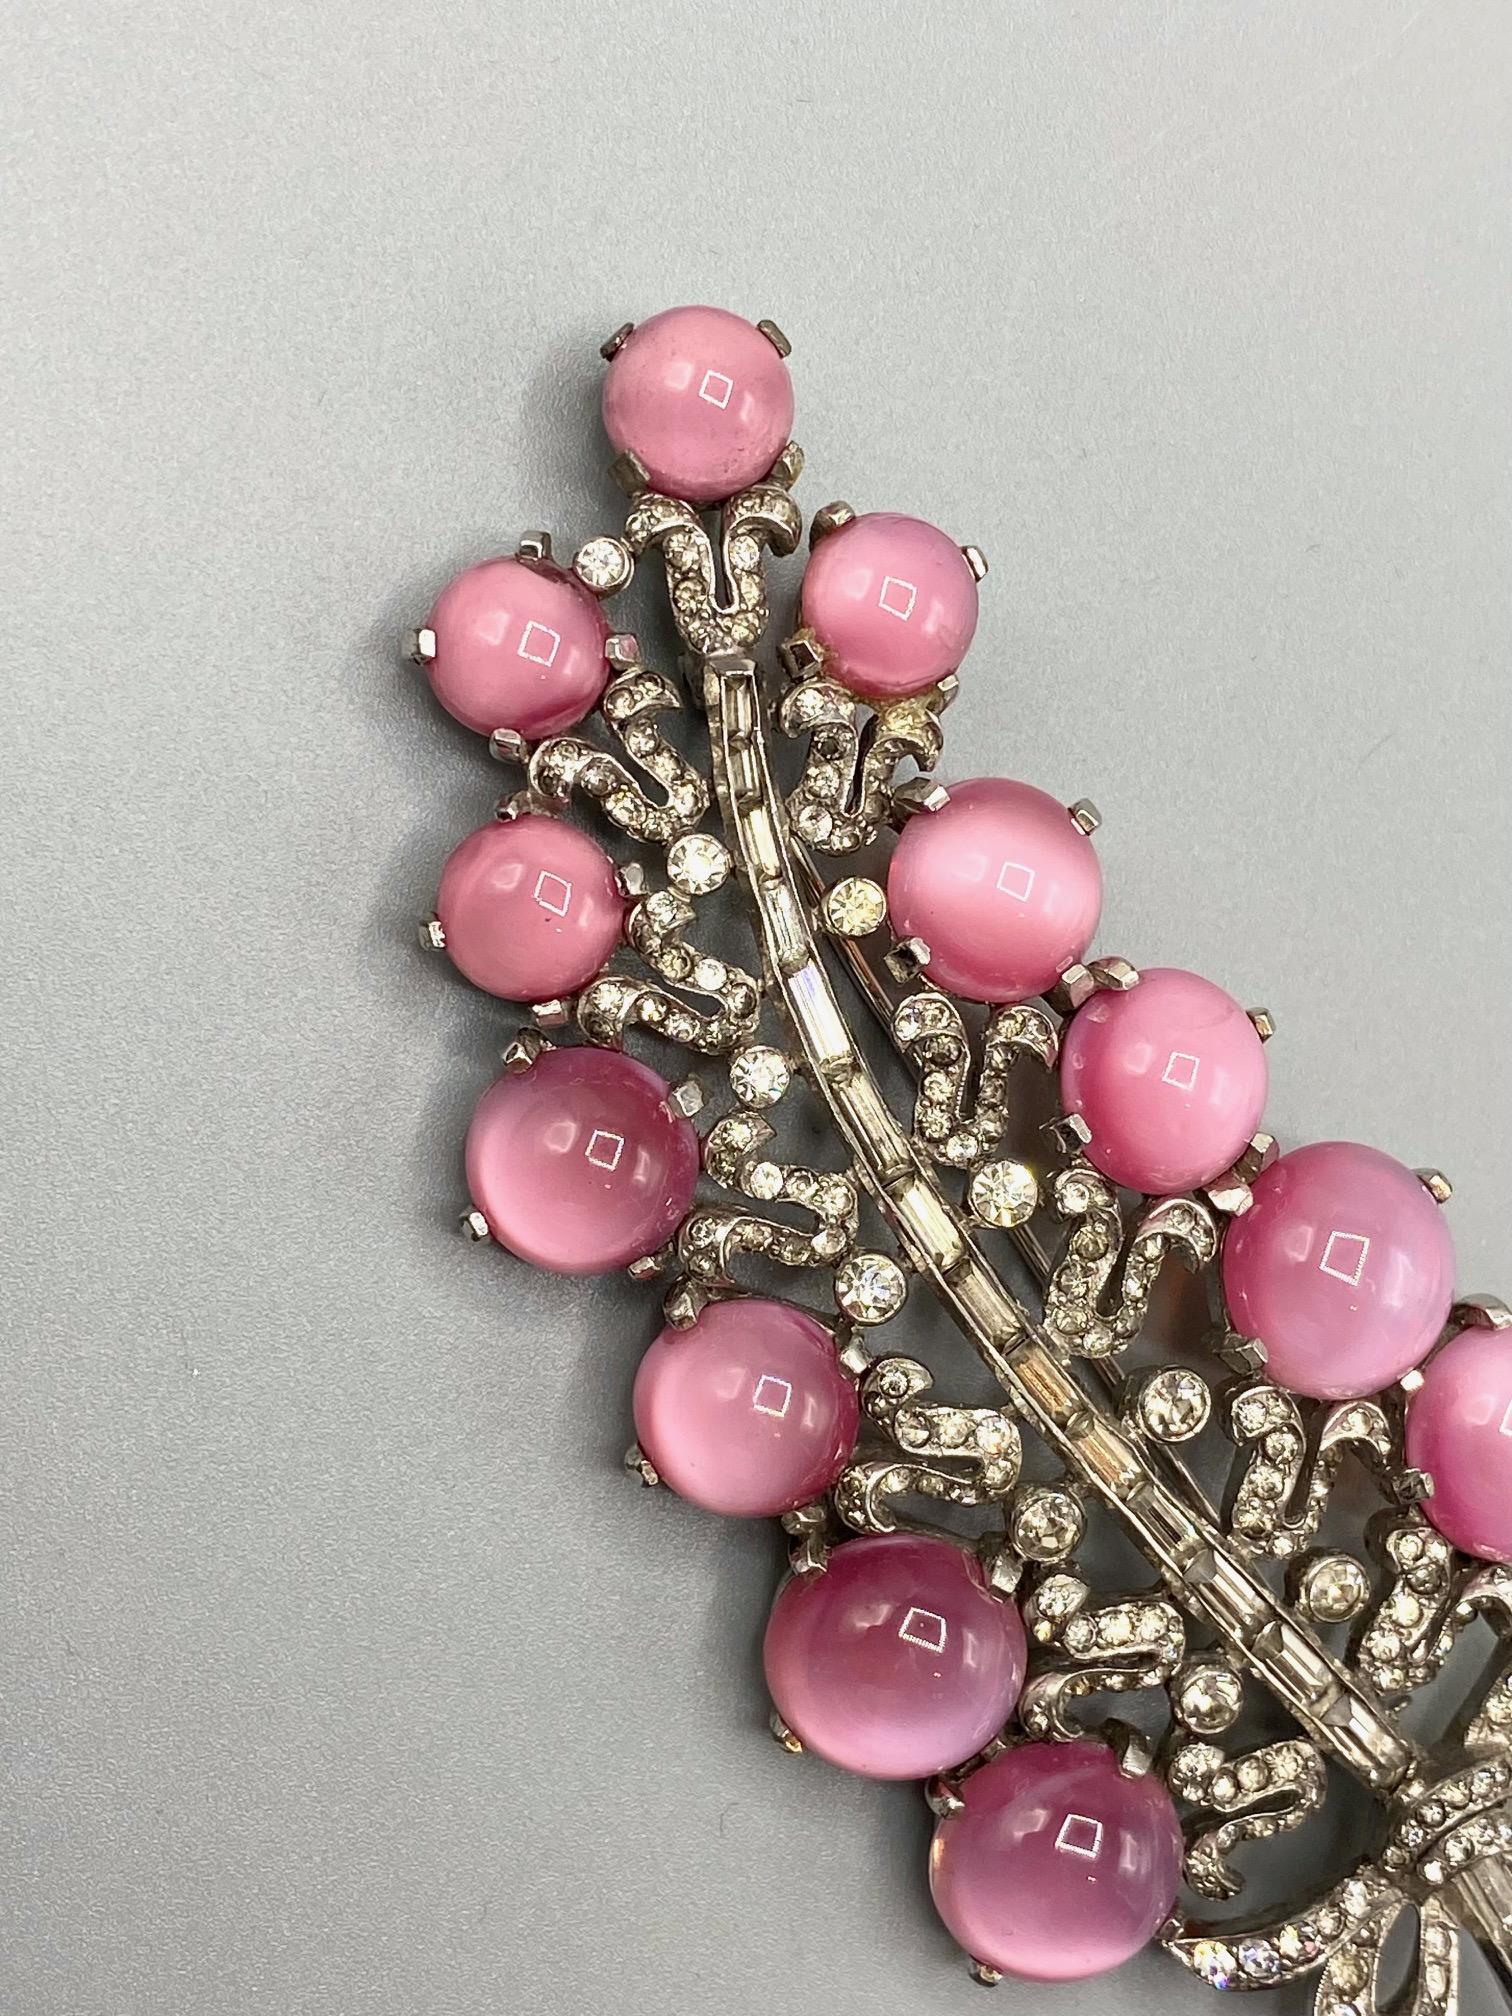 An absolutely stunning and rare unsigned 1940s brooch attributed to Coro. The brooch is top quality with rhodium plating, faux pink glass moonstones, round and baguette rhinestones. It is unmistakably by one of the top costume jewelry companies.